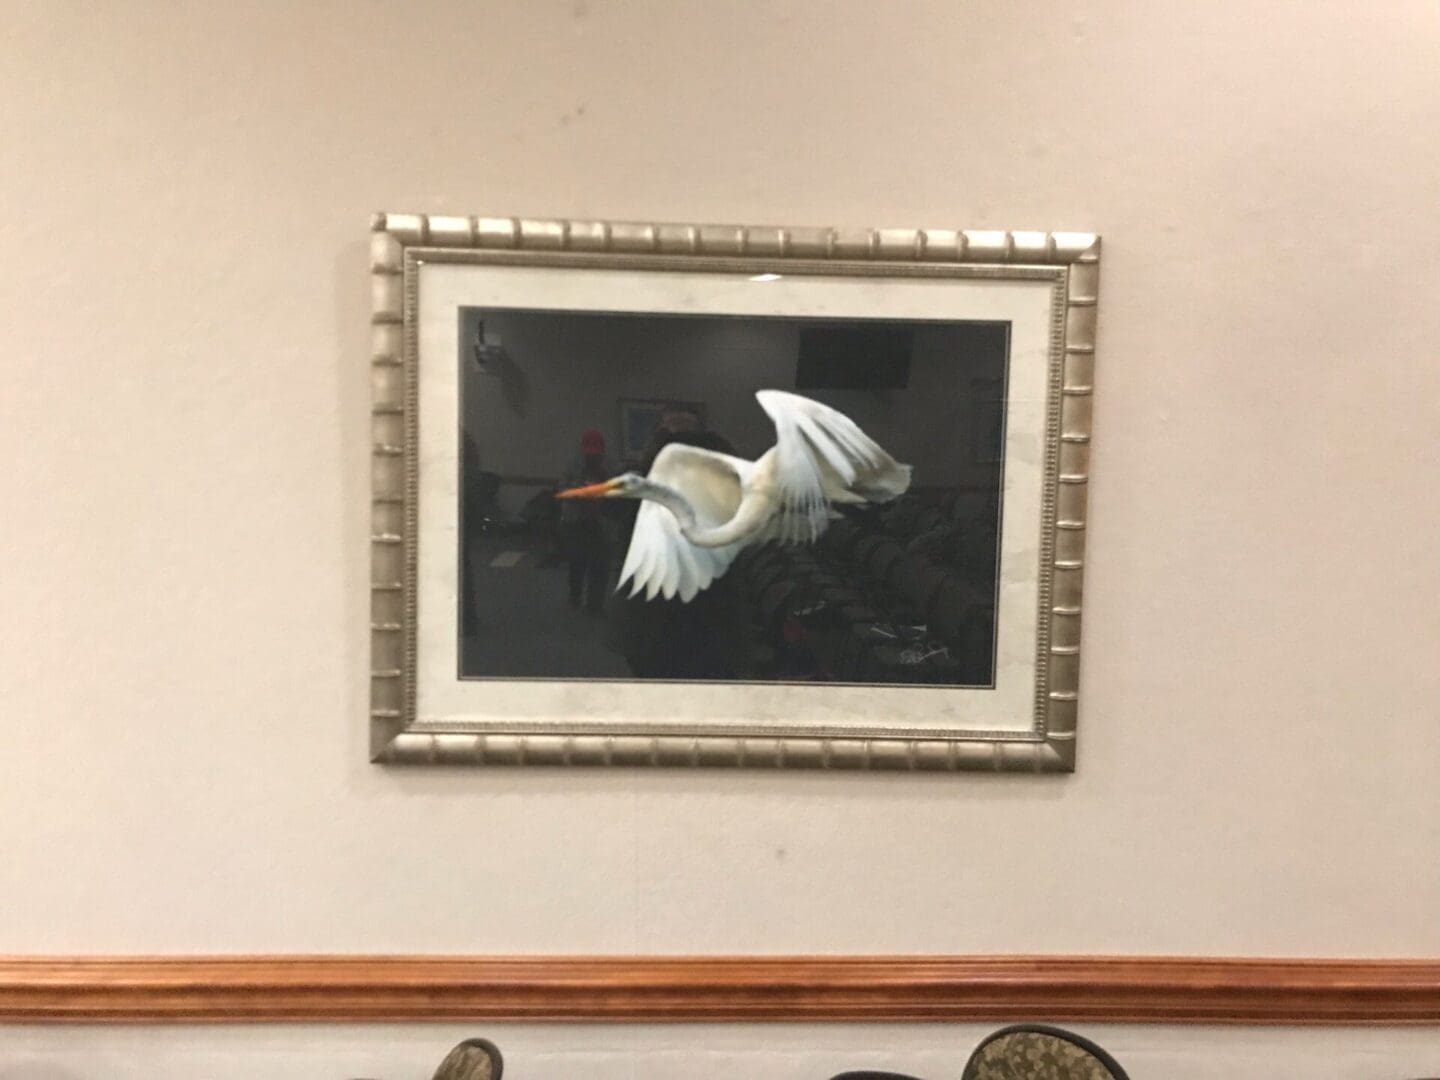 A framed painting of a white egret on the wall captures the beauty of nature.